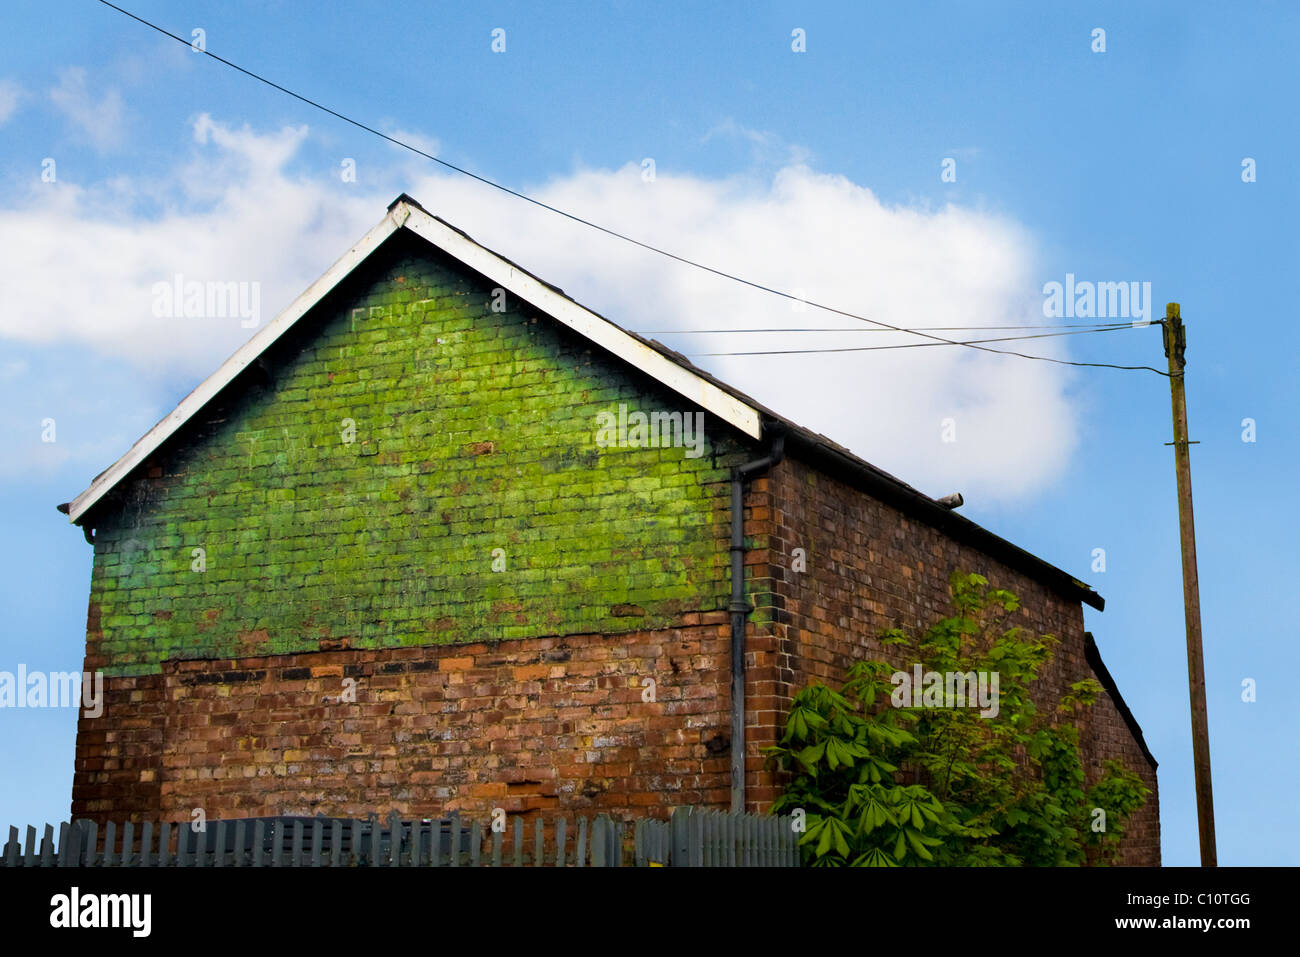 Brick house with green back in a clear blue sky Stock Photo